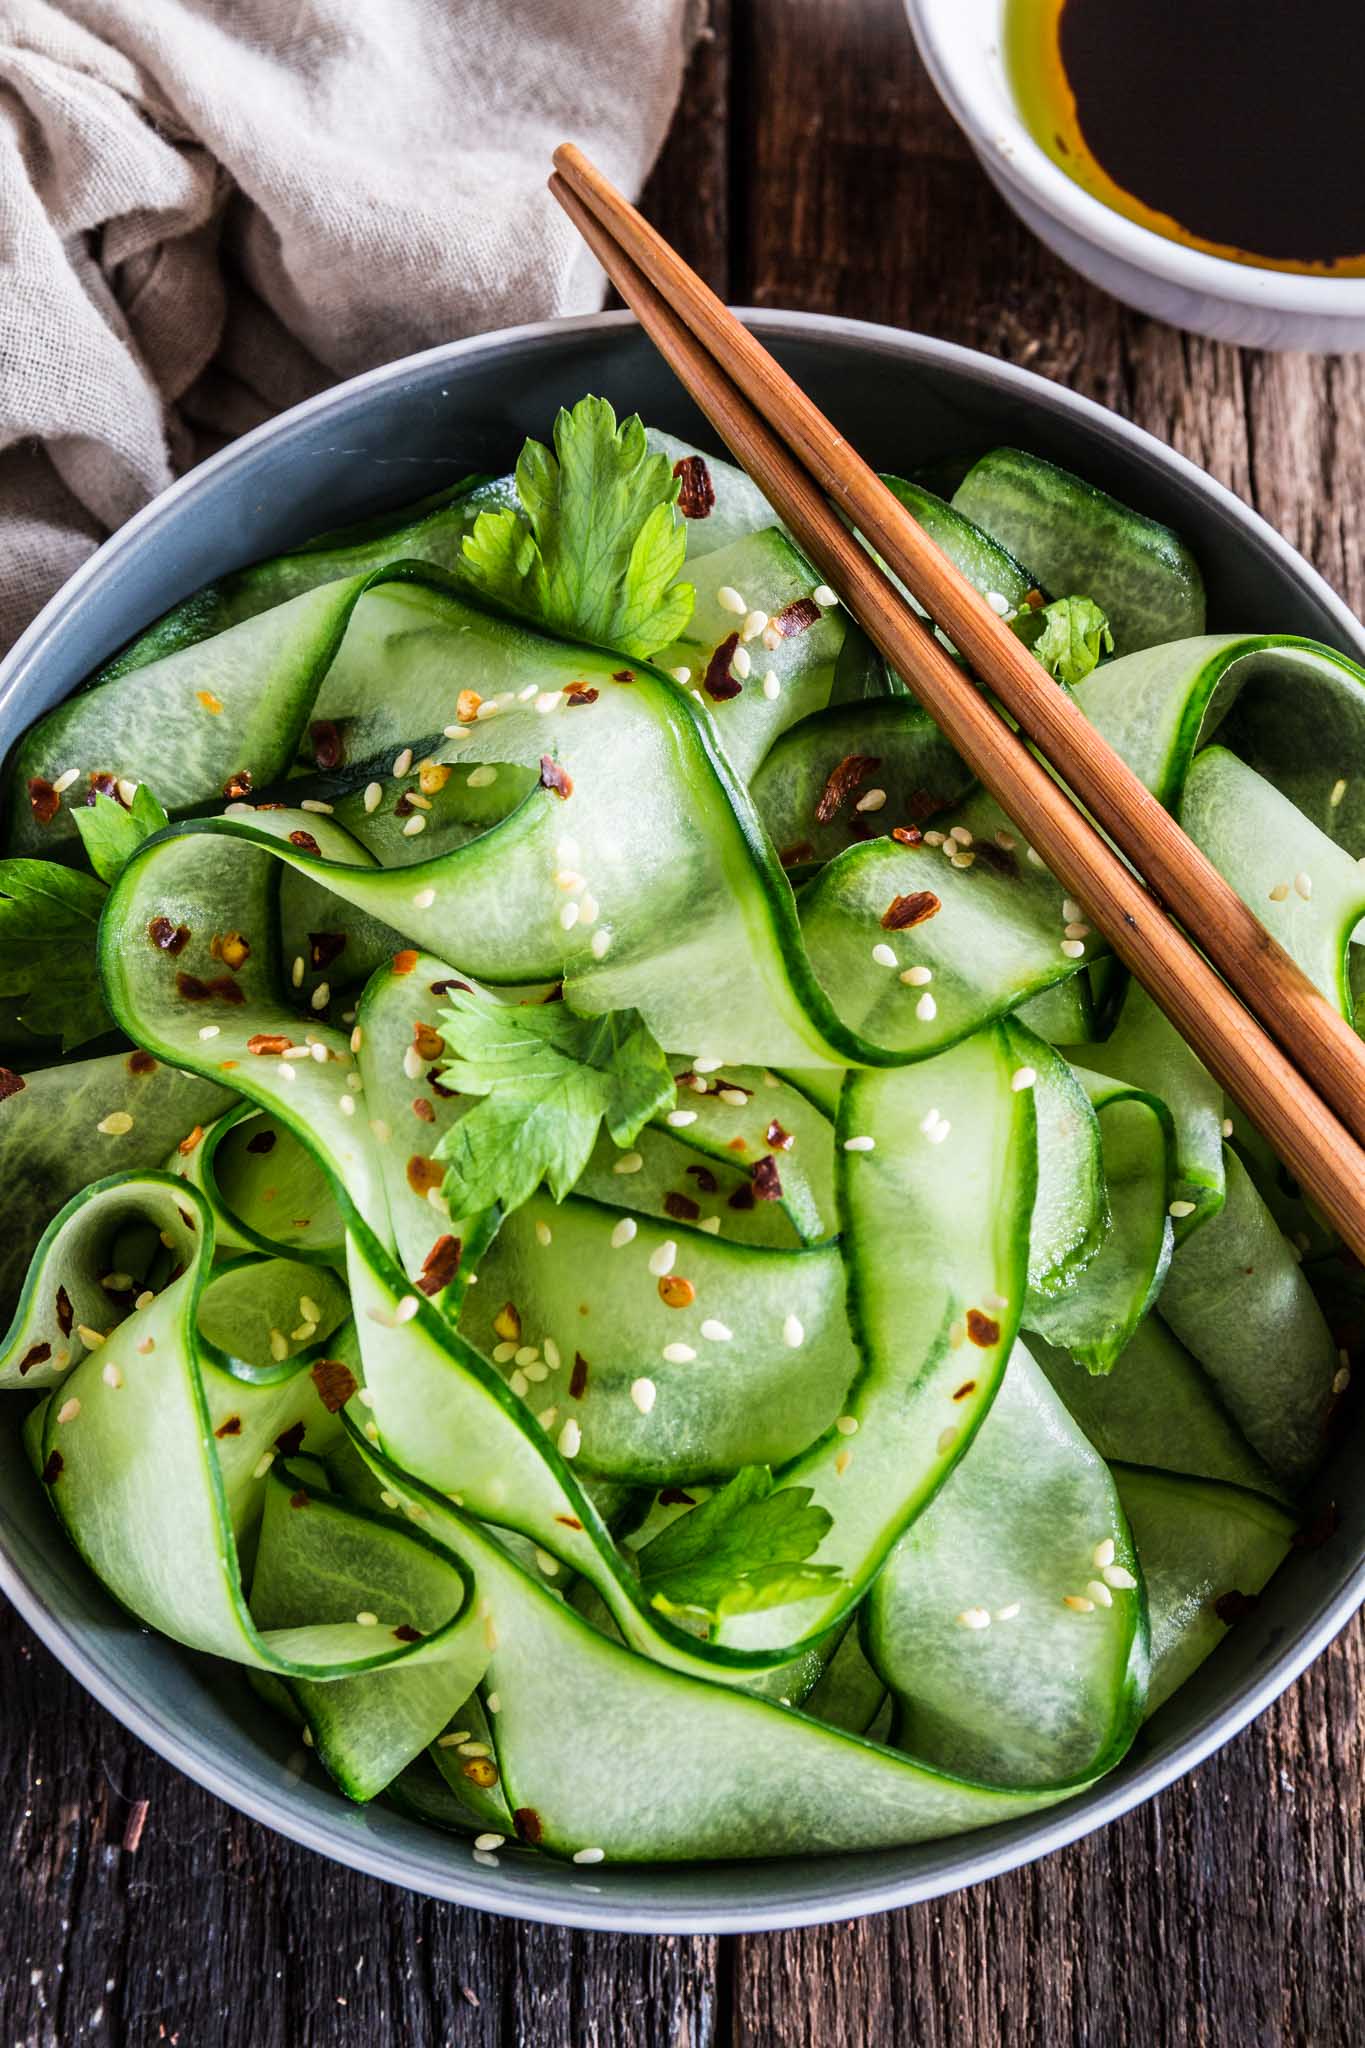 Thai Cucumber Salad with Sesame Ginger Dressing | www.oliviascuisine.com | Some of the best pleasures in life are the simple ones, like this refreshing and light Thai Cucumber Salad. It comes together in less than 5 minutes, so you won't have to miss any second of that sacred summer sunshine! (Recipe by @oliviascuisine.)